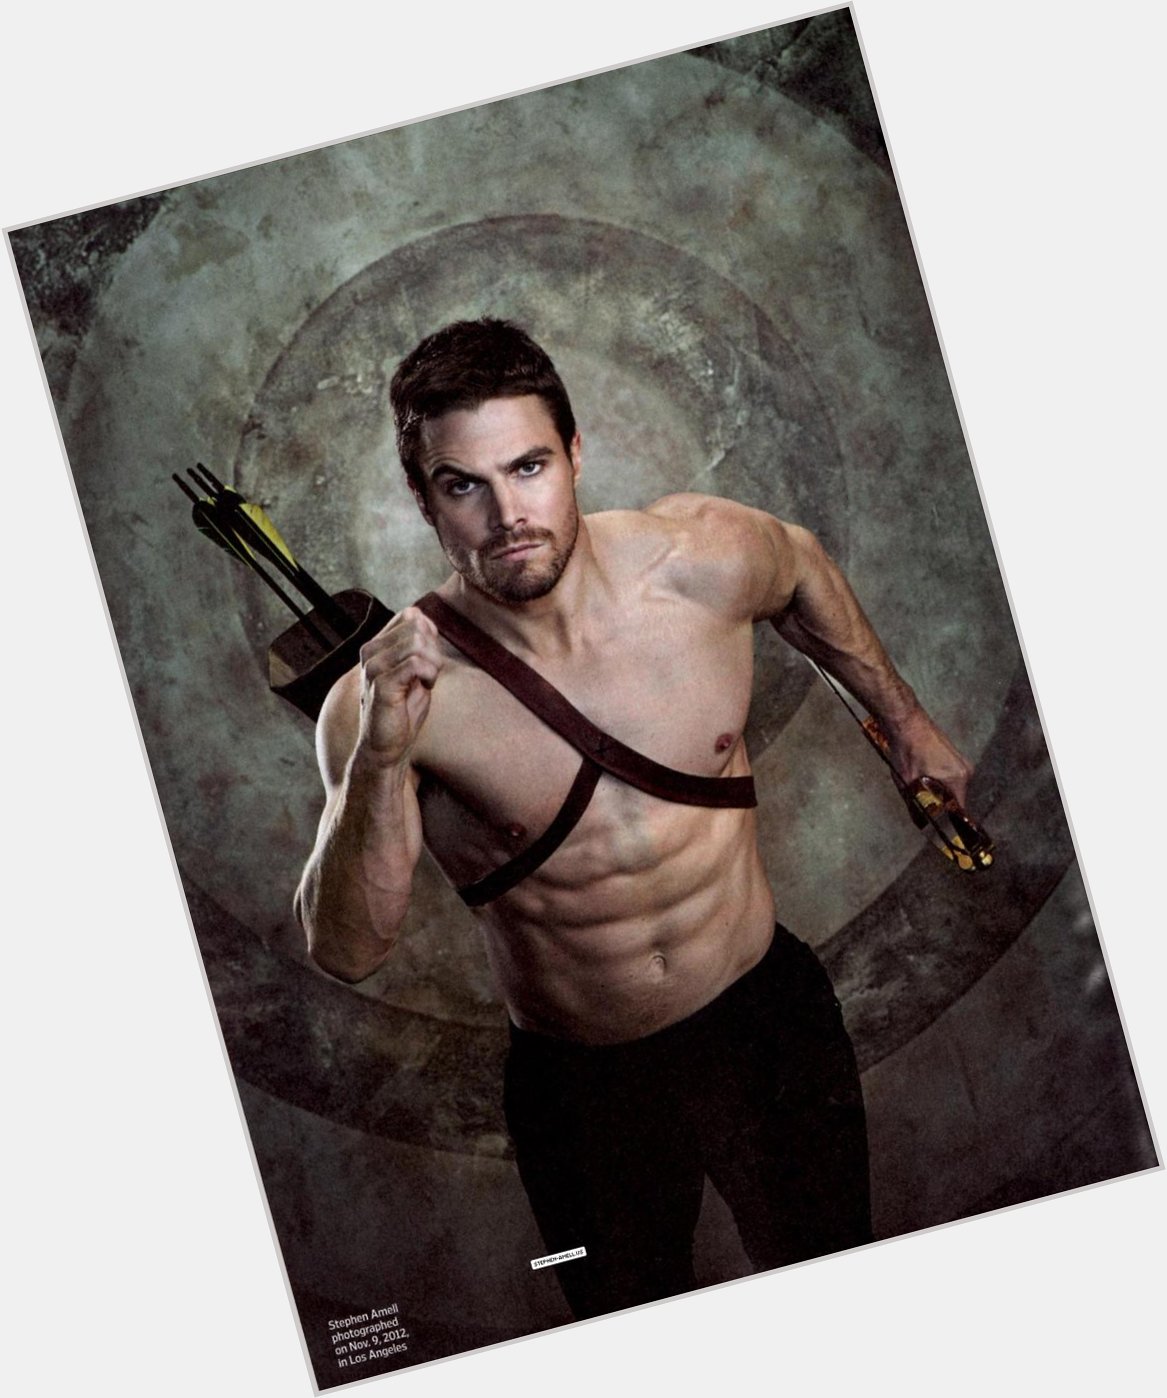 Happy Birthday, Stephen Amell! Greatest Canadian action star since William Shatner hit the lower 48. 